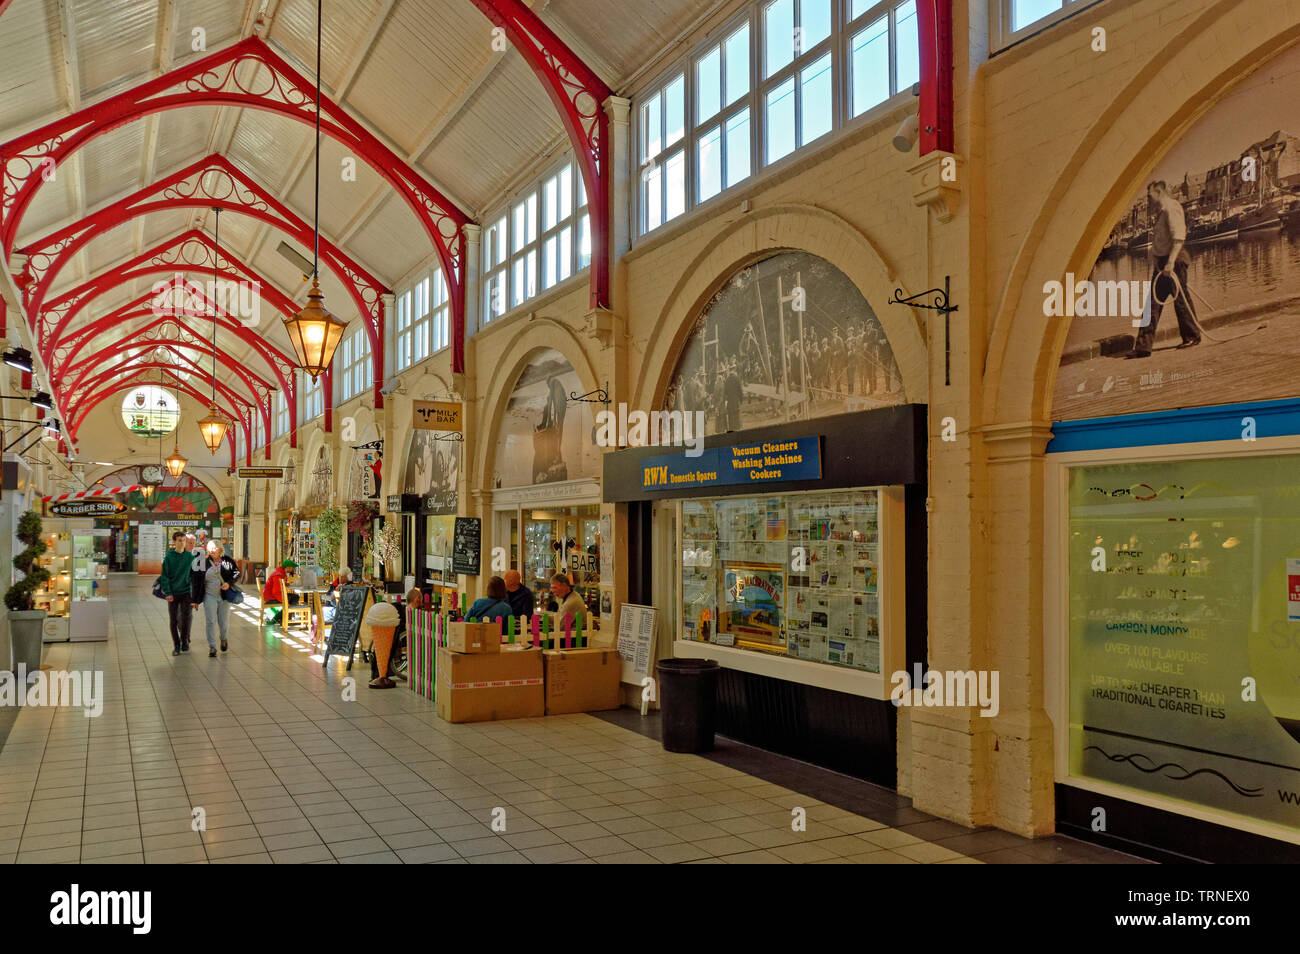 INVERNESS CITY SCOTLAND CENTRAL CITY THE INTERIOR OF THE VICTORIAN COVERED MARKET AND SHOPS Stock Photo